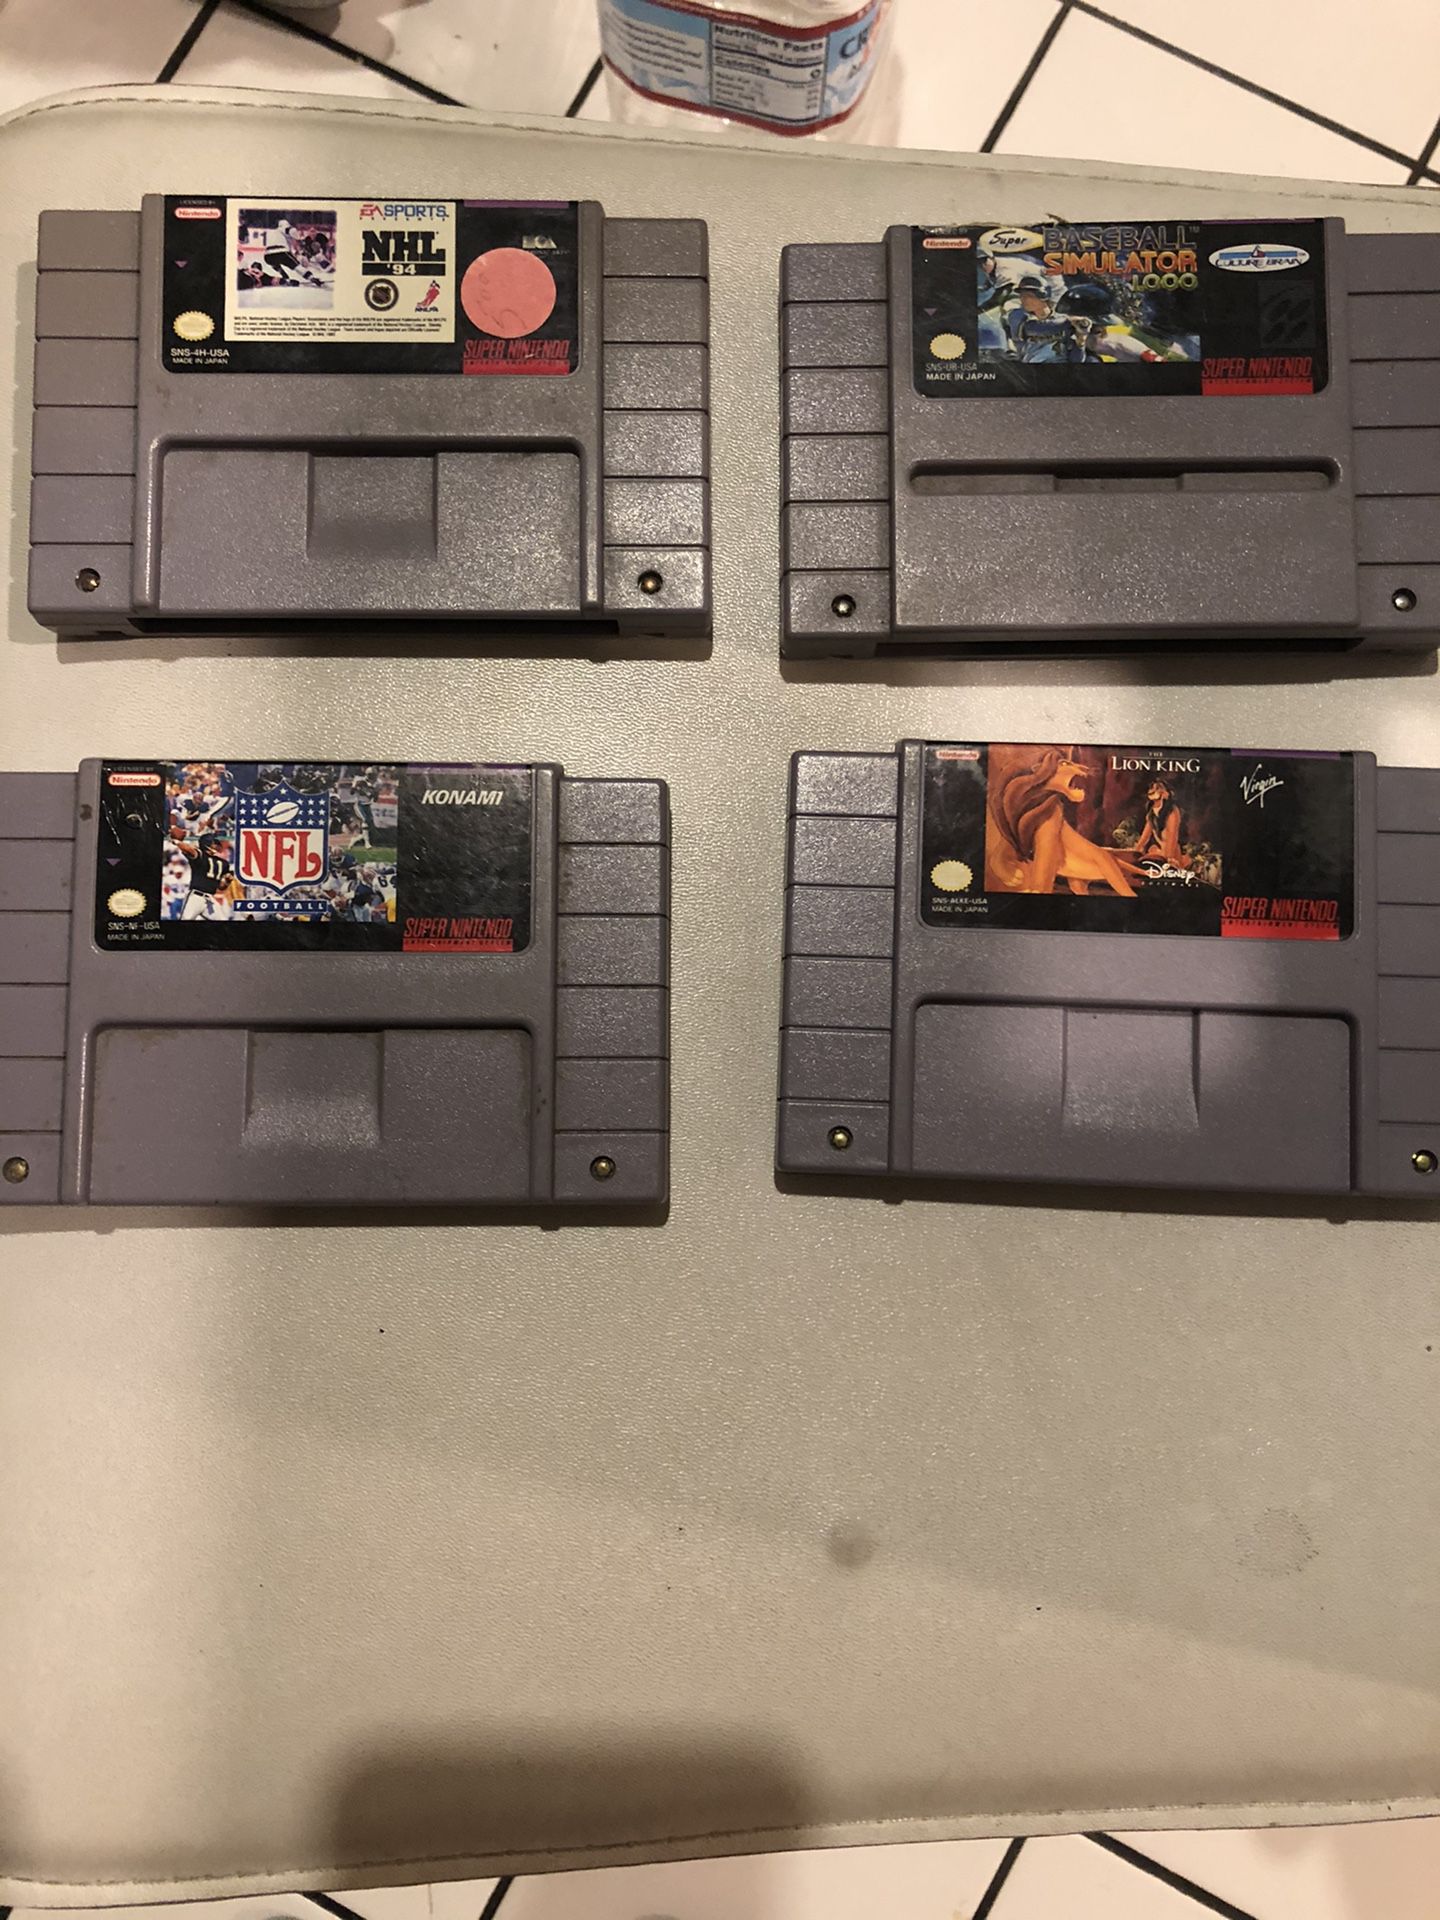 Super Nintendo games snes games (prices are in description.) All game tested....